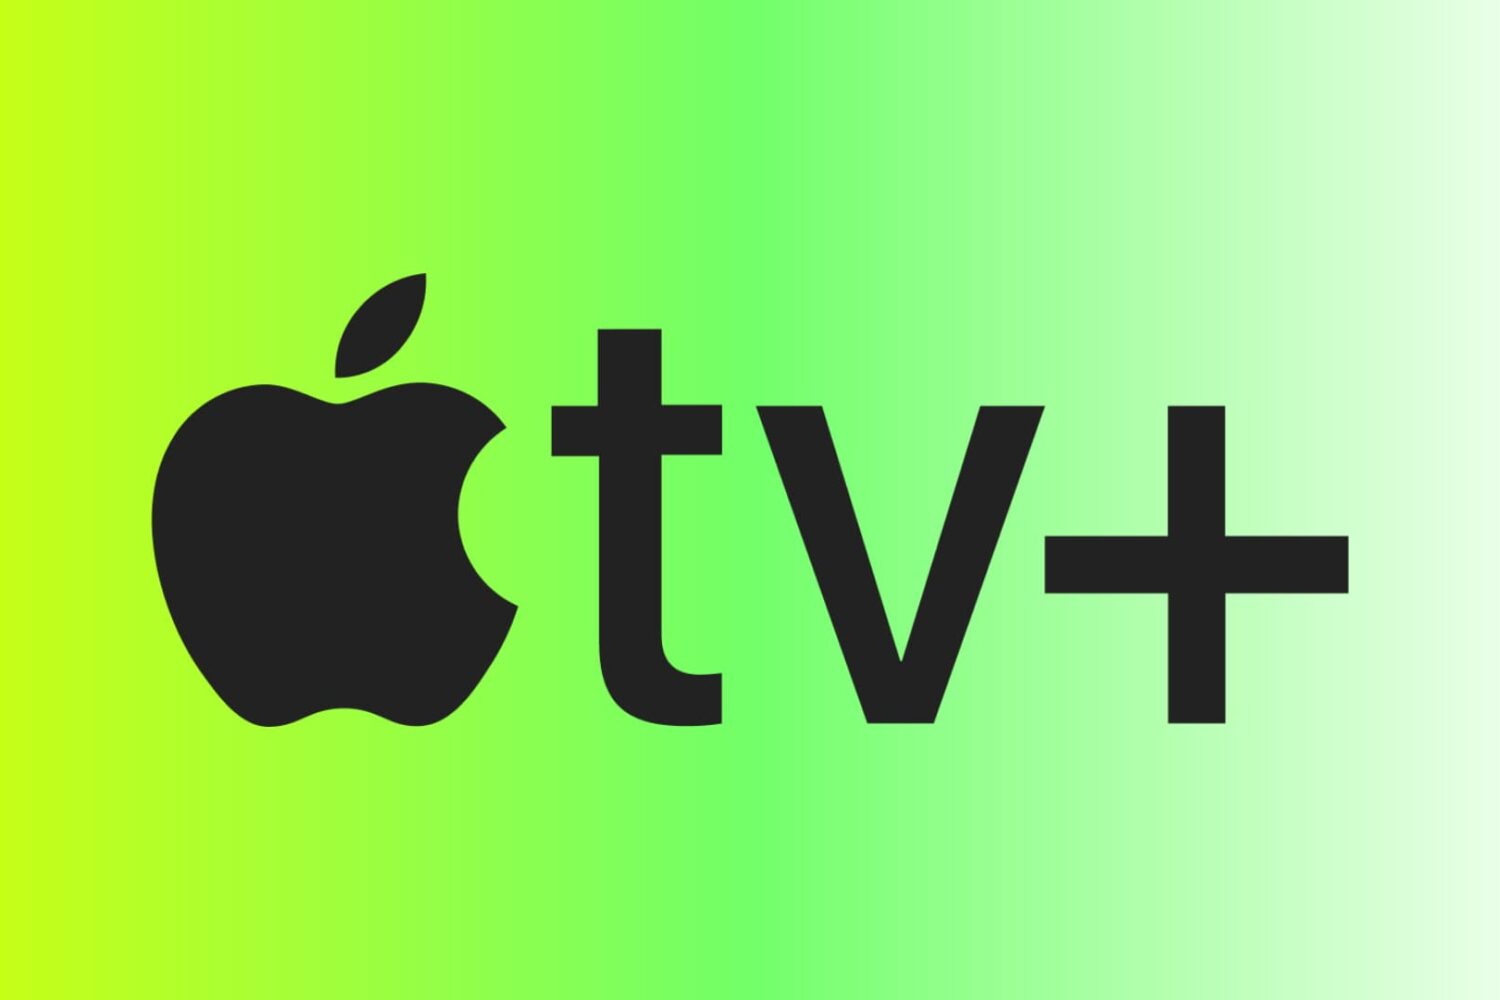 Apple TV Plus icon on a green gradient background